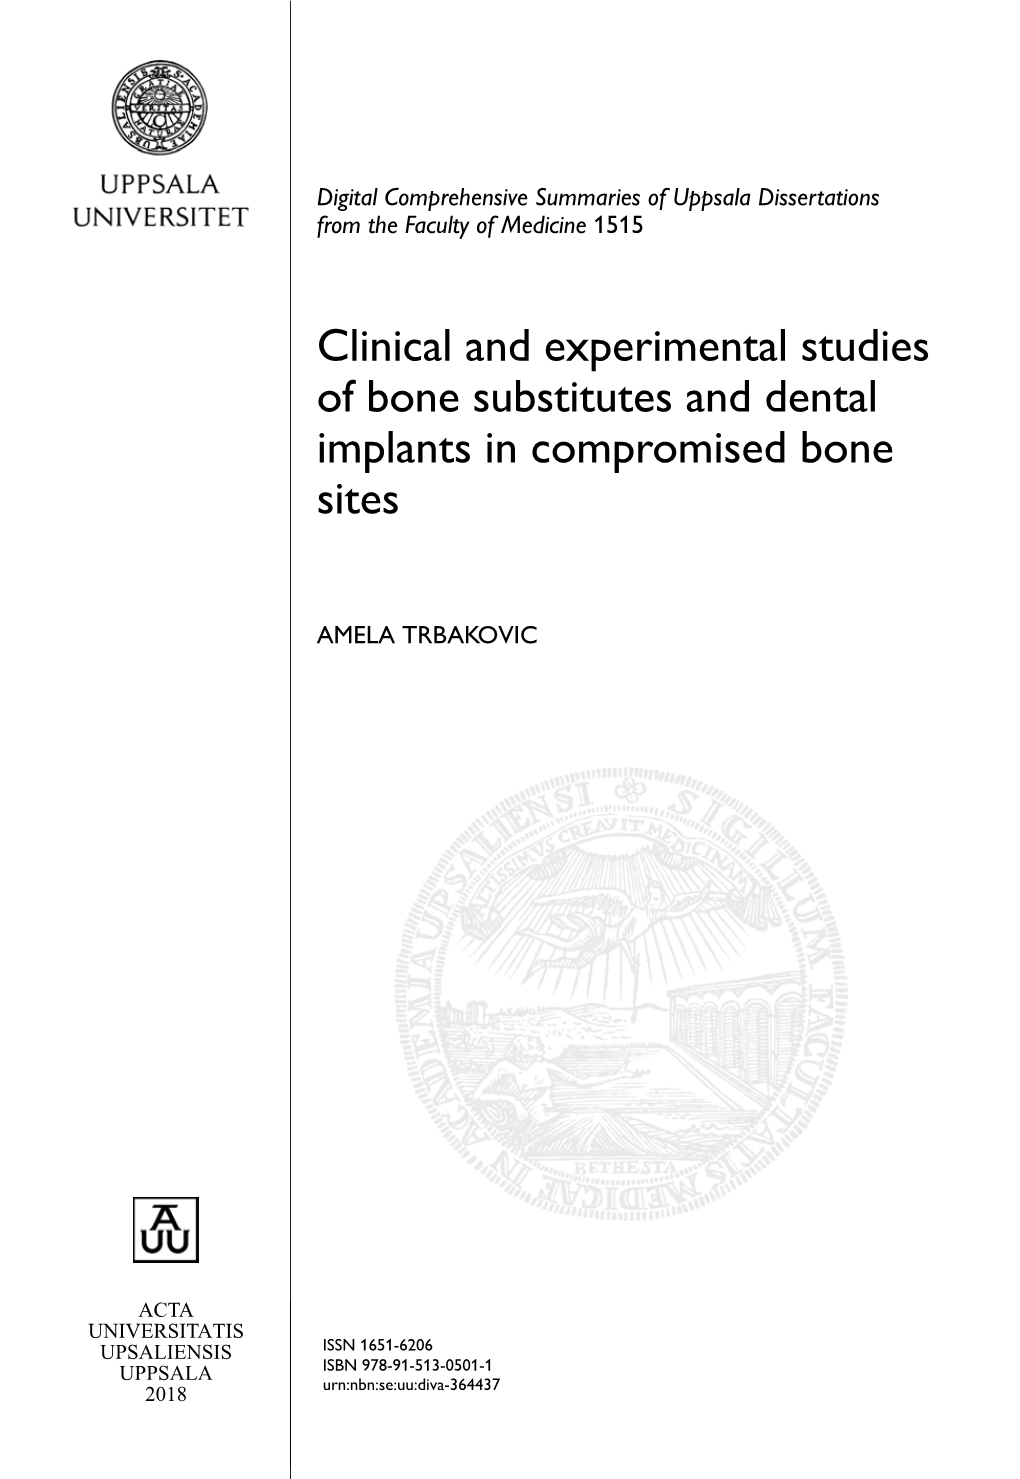 Clinical and Experimental Studies of Bone Substitutes and Dental Implants in Compromised Bone Sites